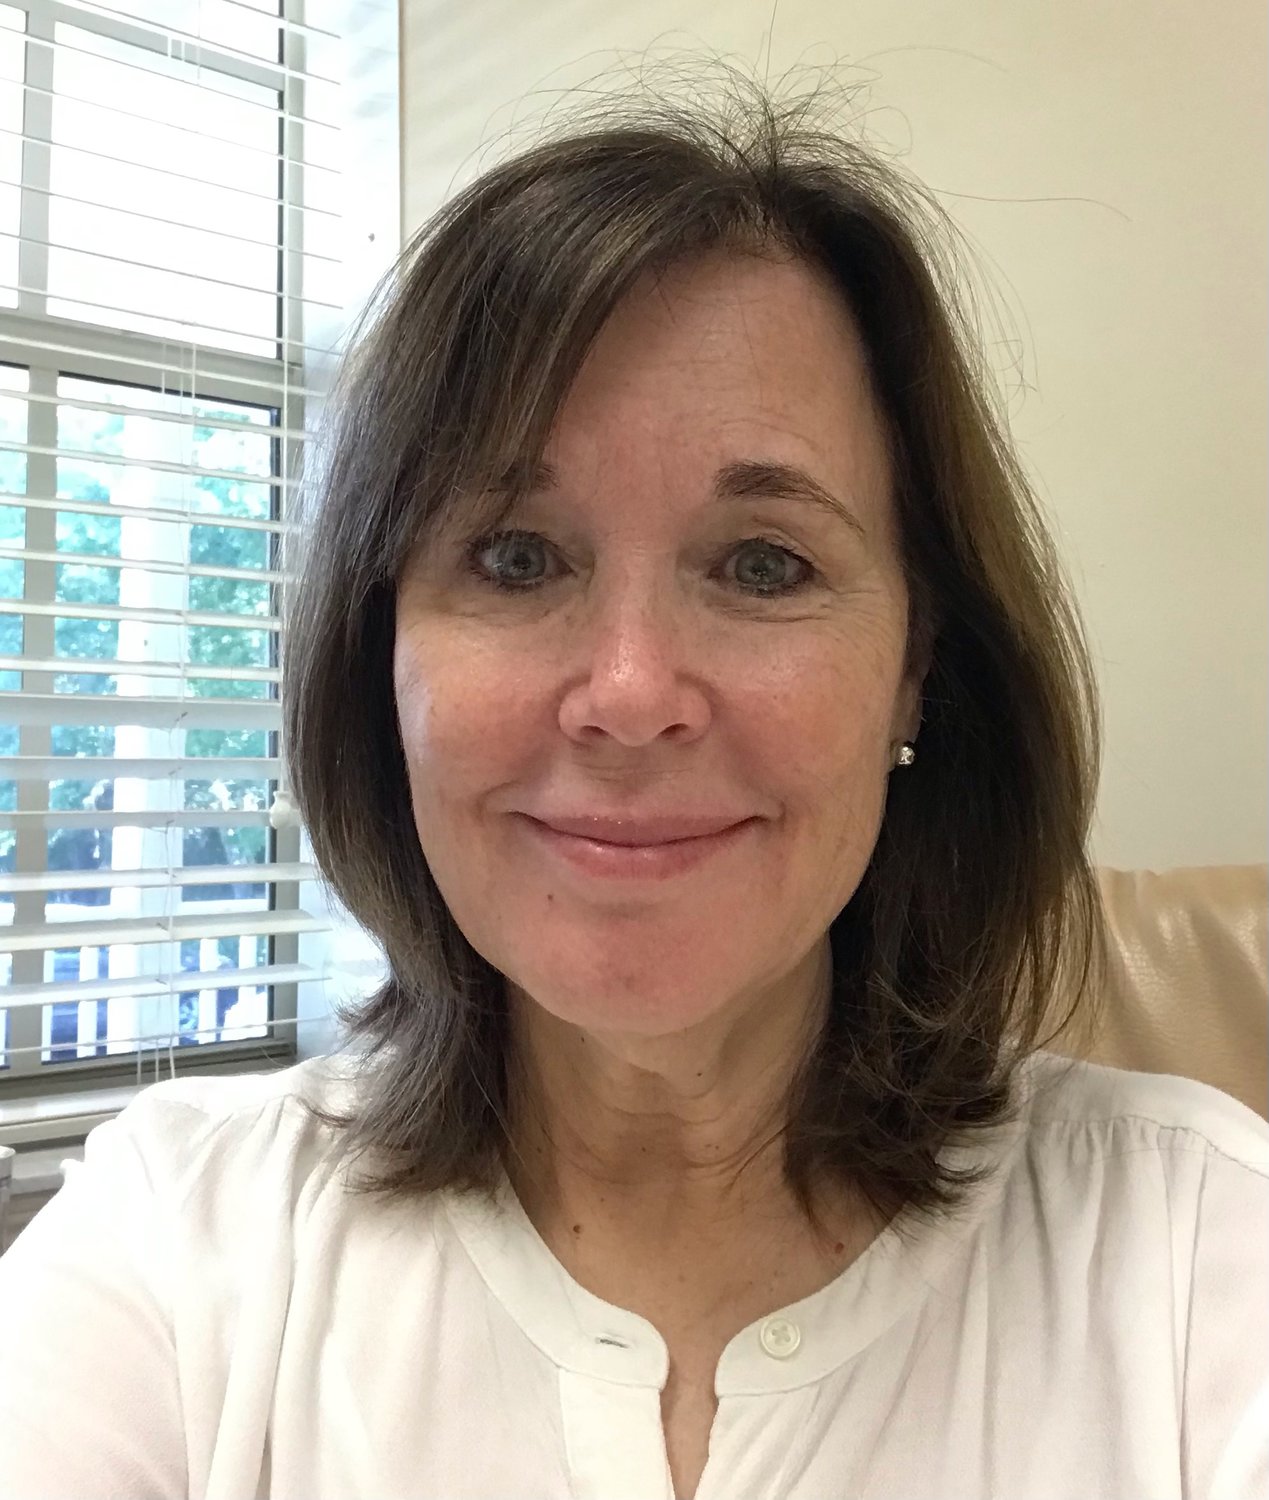 Sharon Gesek has been the program director for the St. Johns County Council on Aging since May 2019.